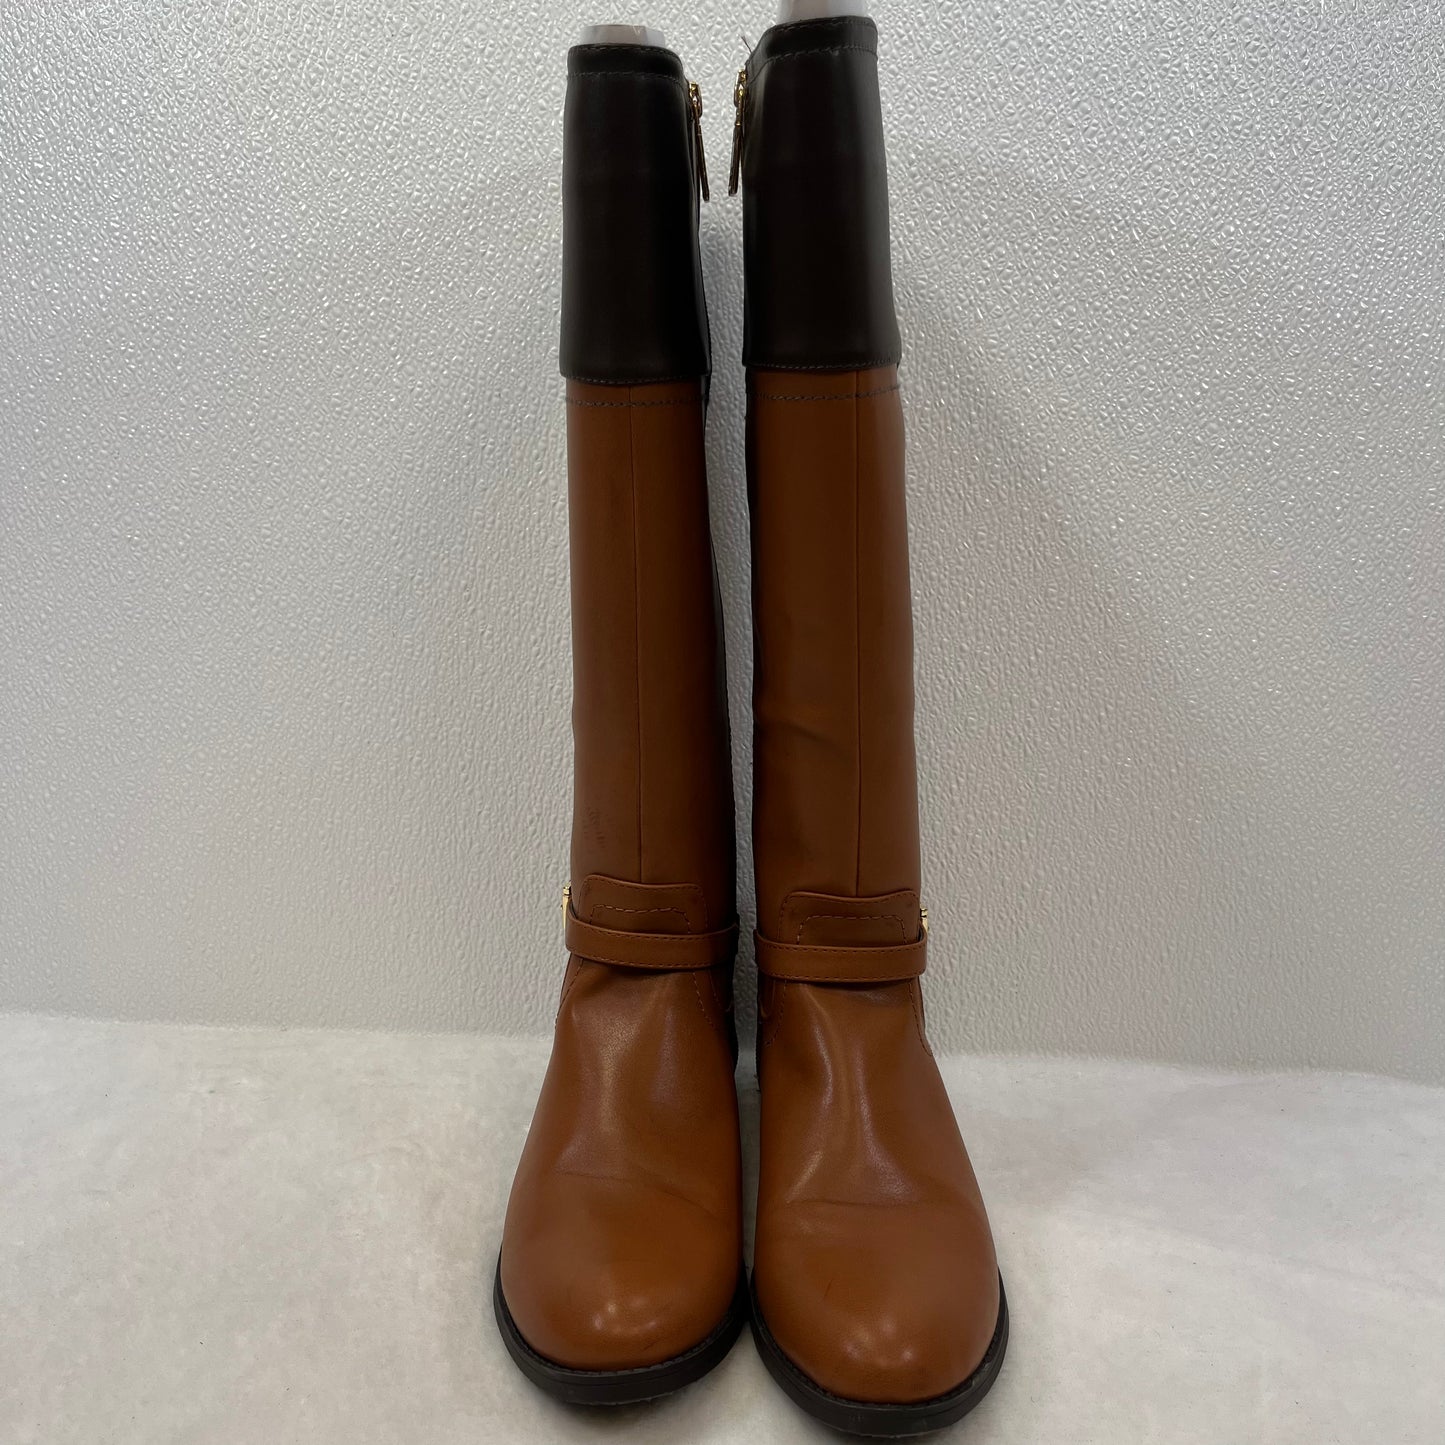 Boots Knee Flats By Tommy Hilfiger  Size: 8.5